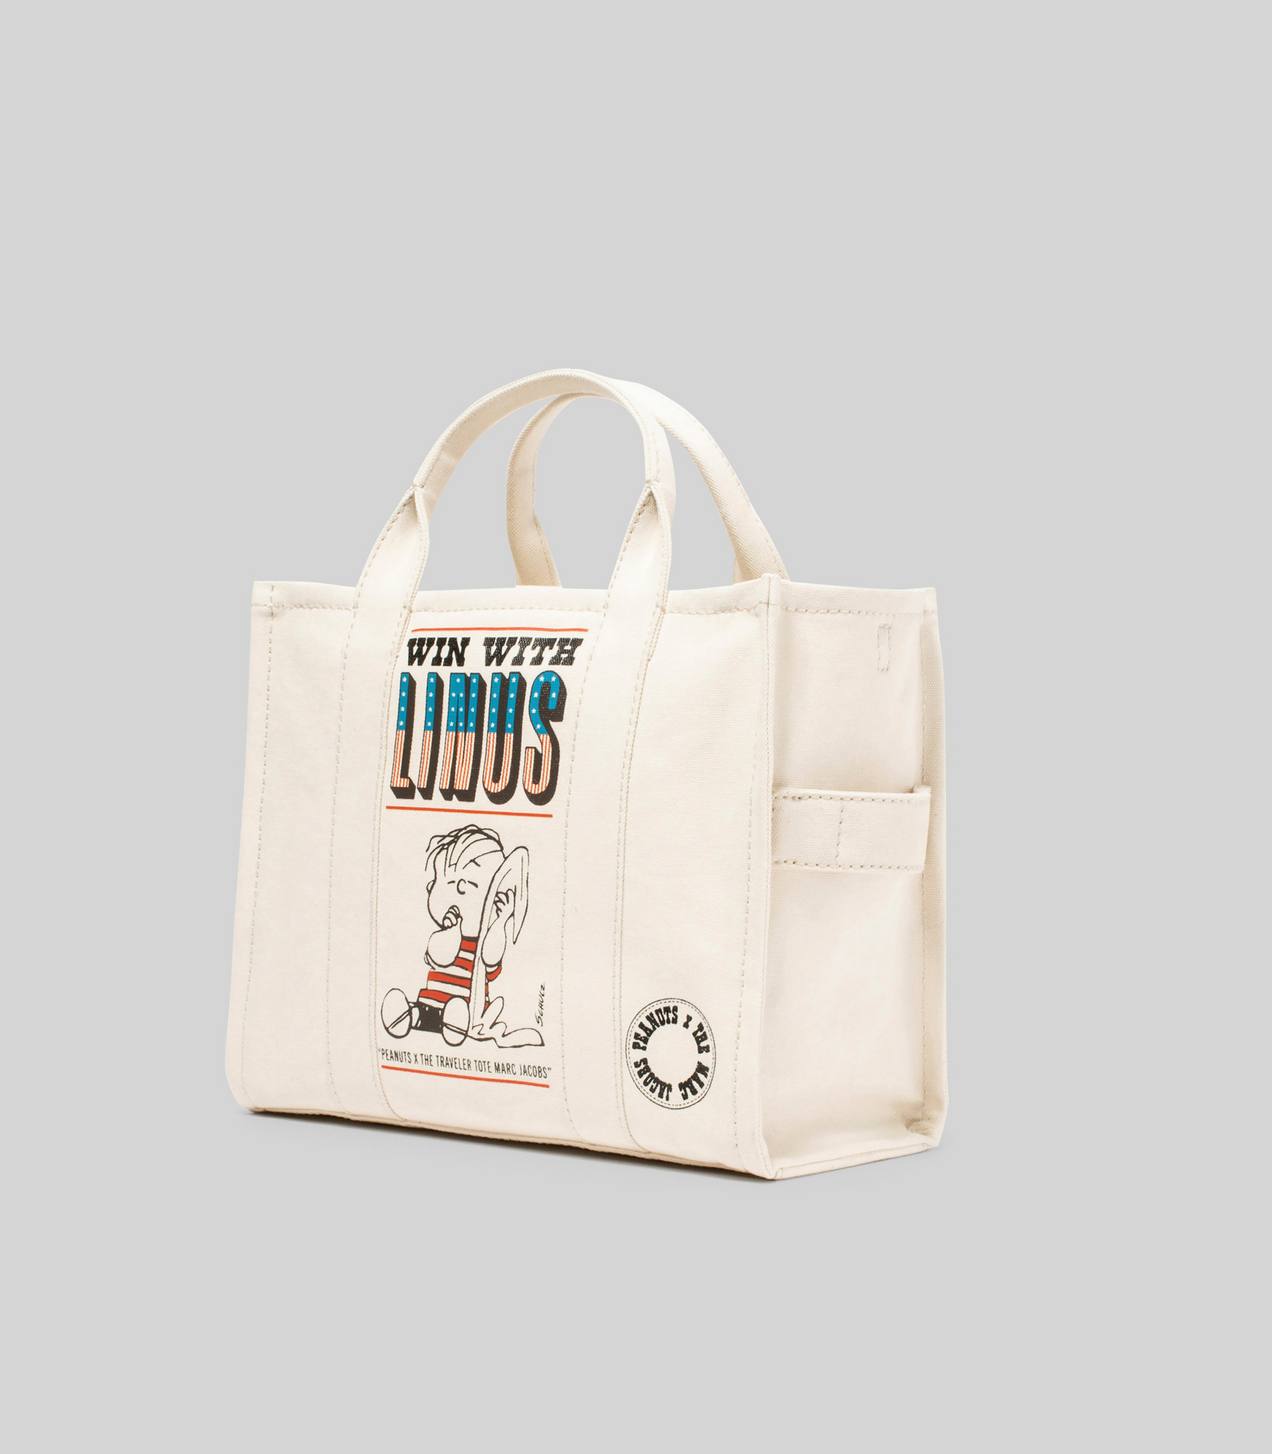 Peanuts x Marc Jacobs The Small Traveler Tote Bag